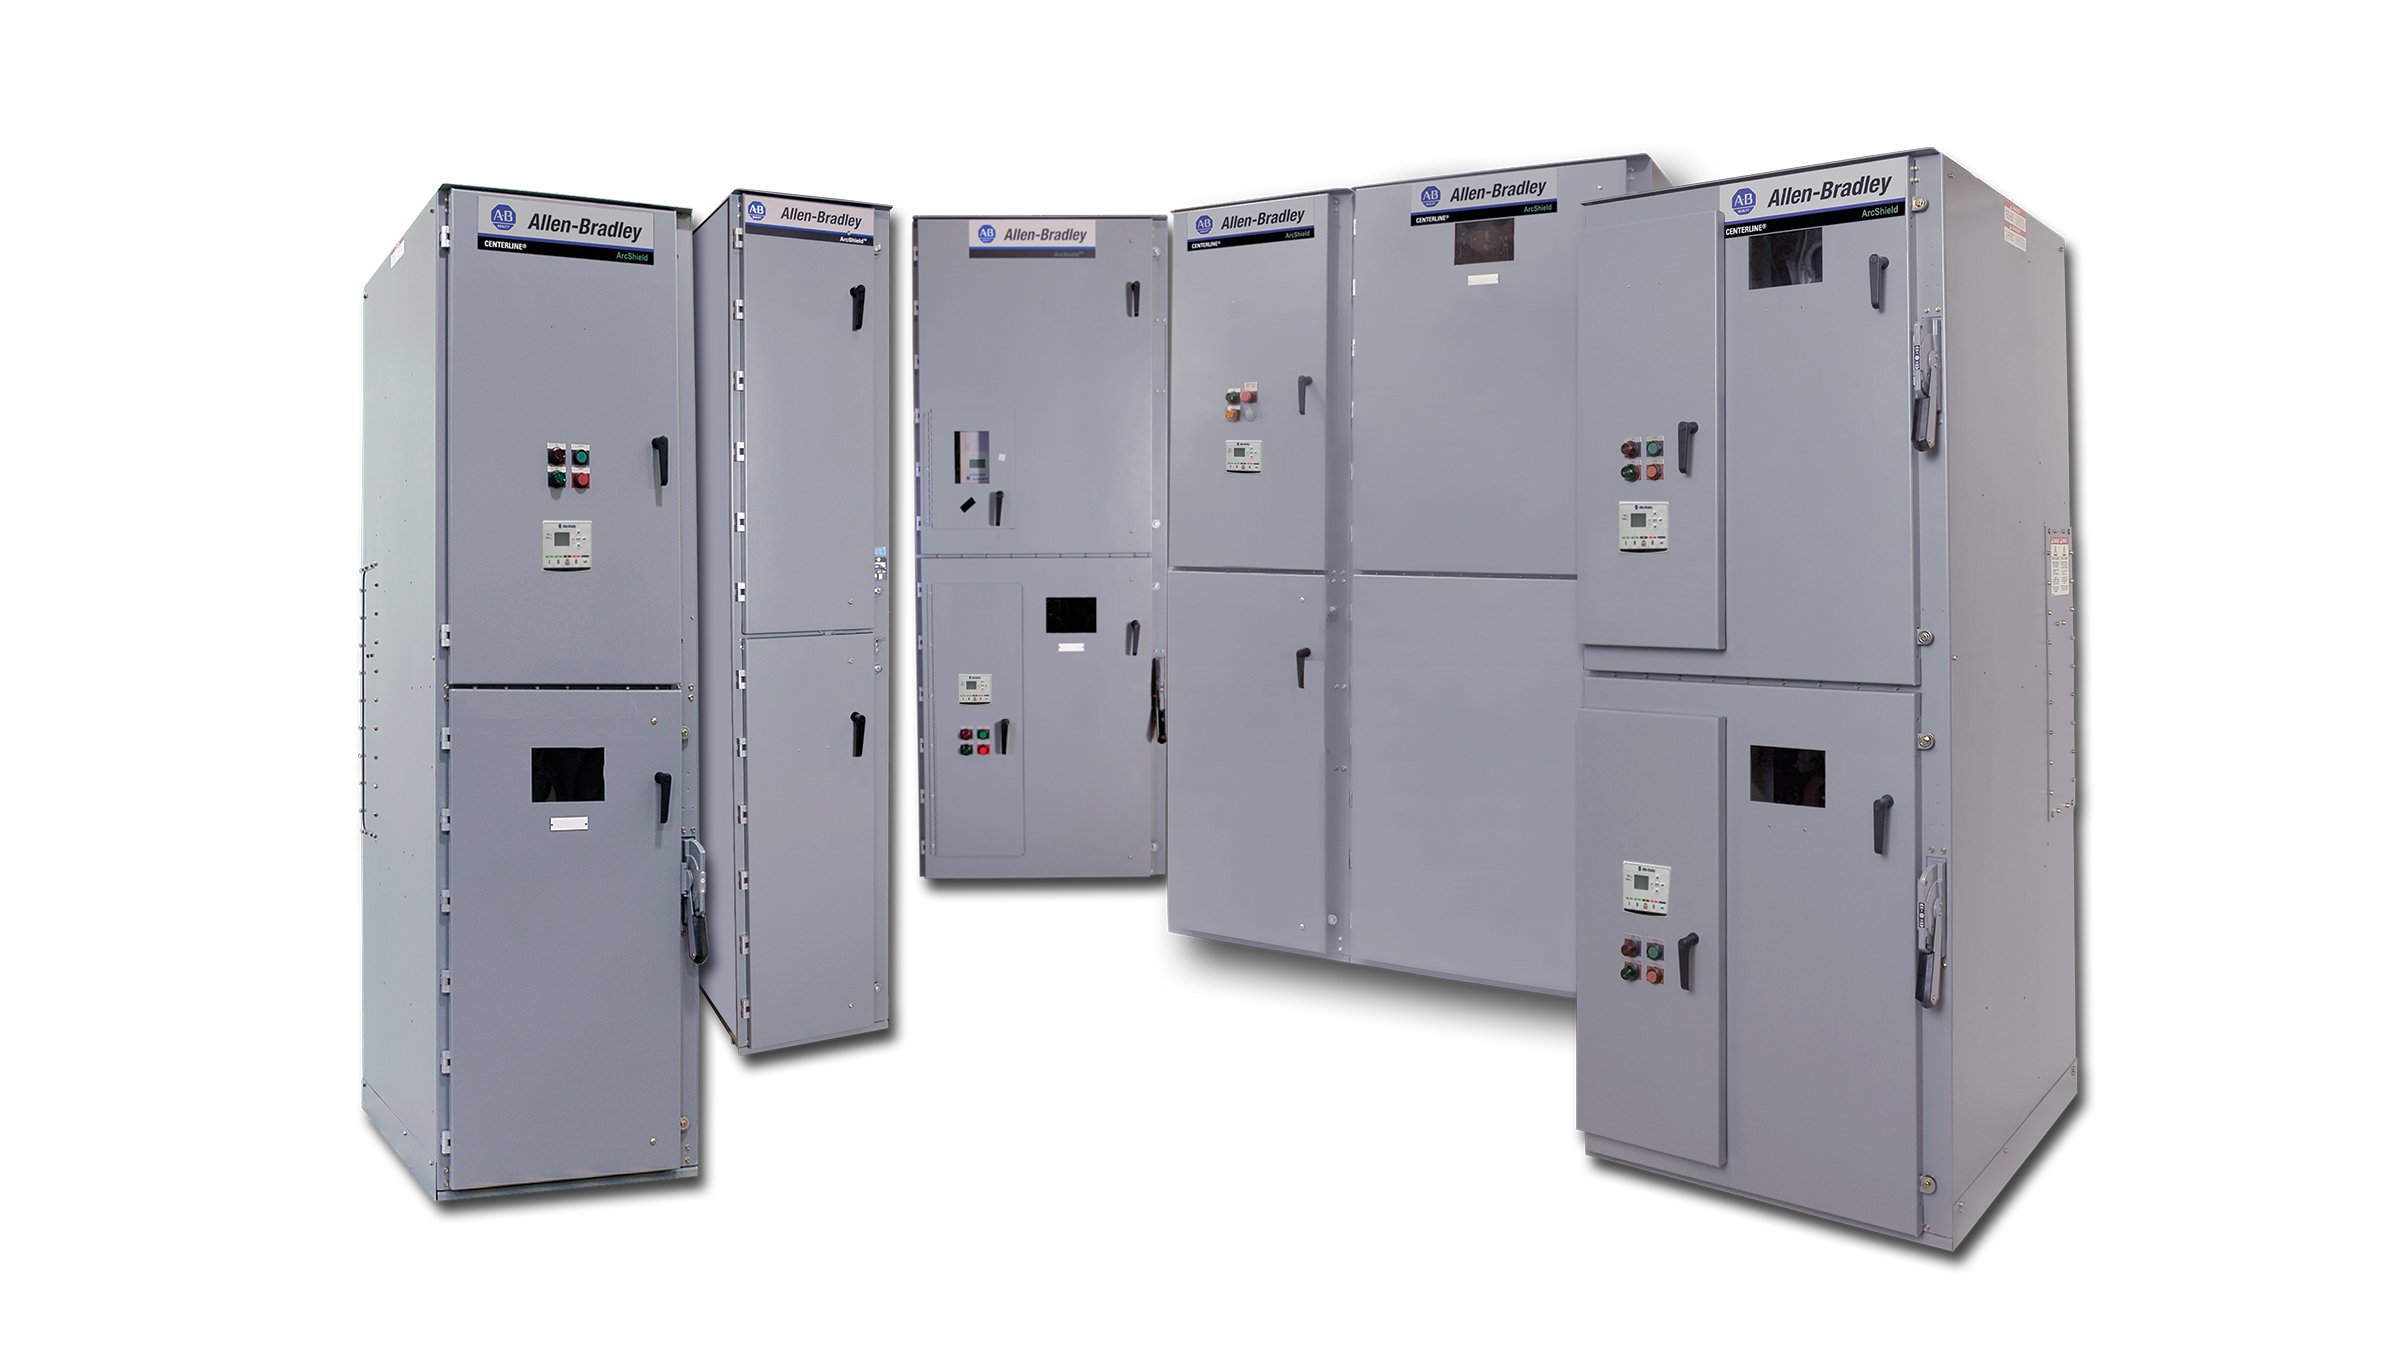 A group of six tall, gray, metal cabinets house CENTERLINE 1500 motor control centers.